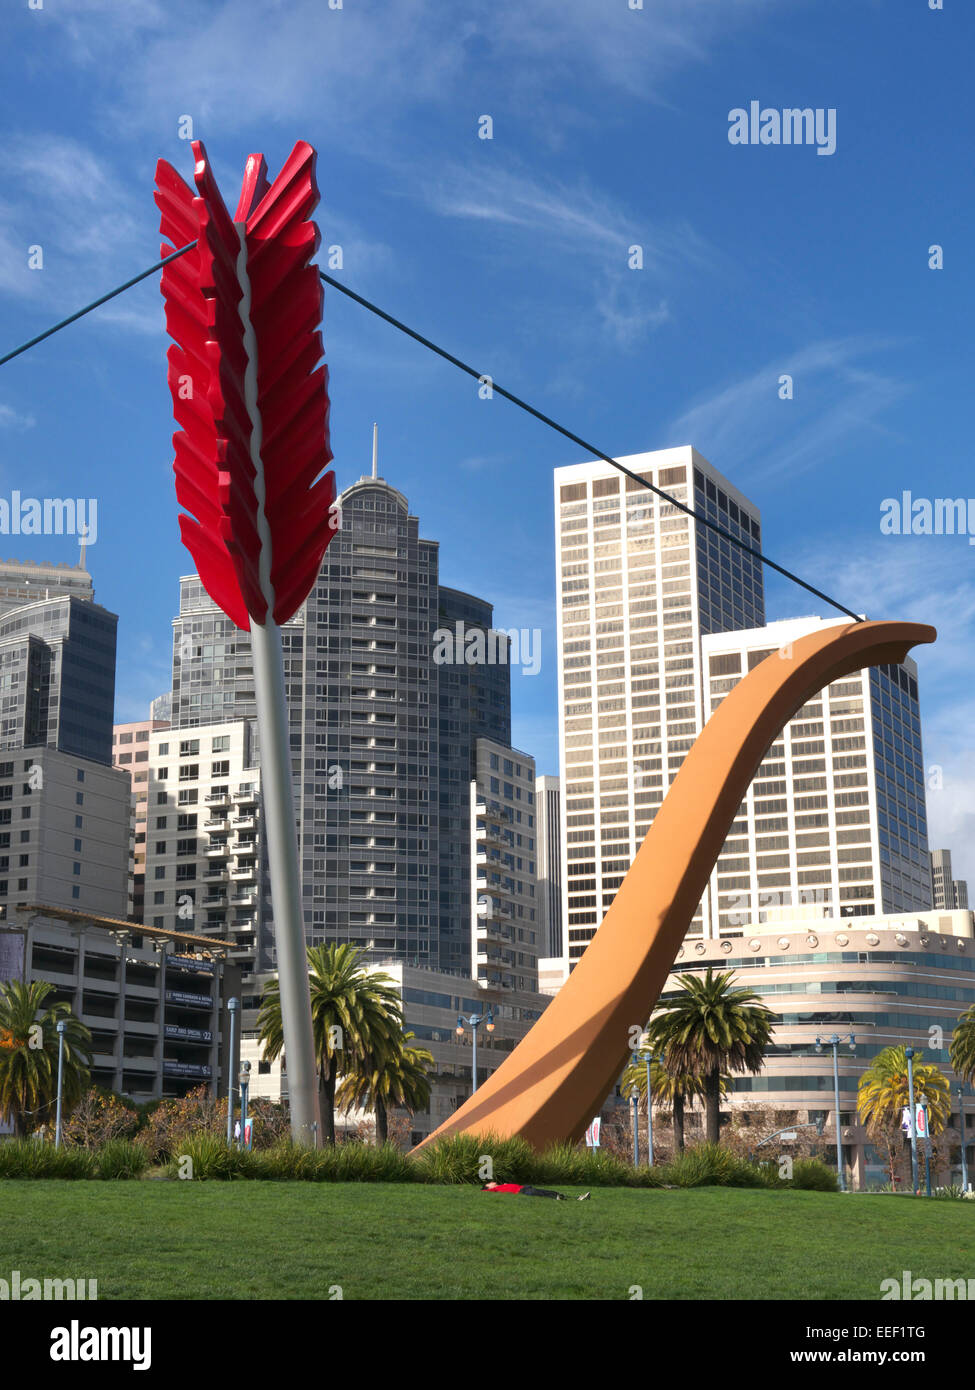 'Cupid's Span' a giant bow and arrow sculpture on the Embarcadero with man lying on grass San Francisco California USA Stock Photo